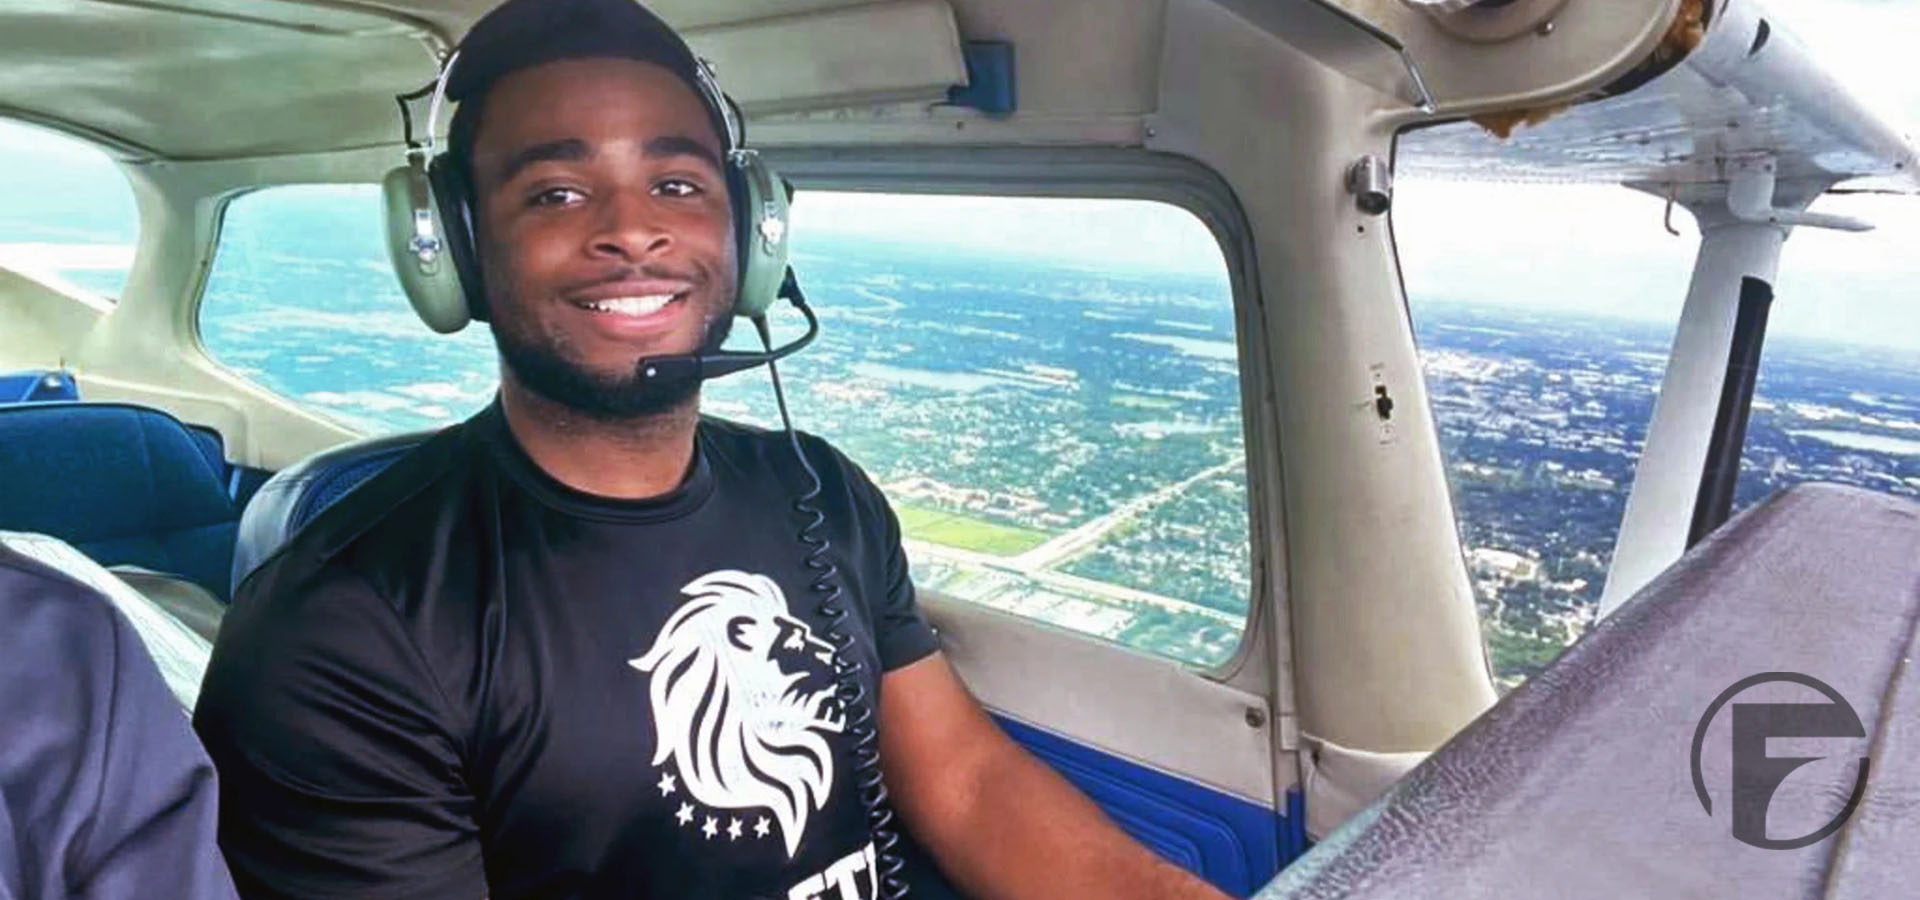 Airlines struggling with shortages want to recruit more diverse pilots. This HBCU could be a solution.